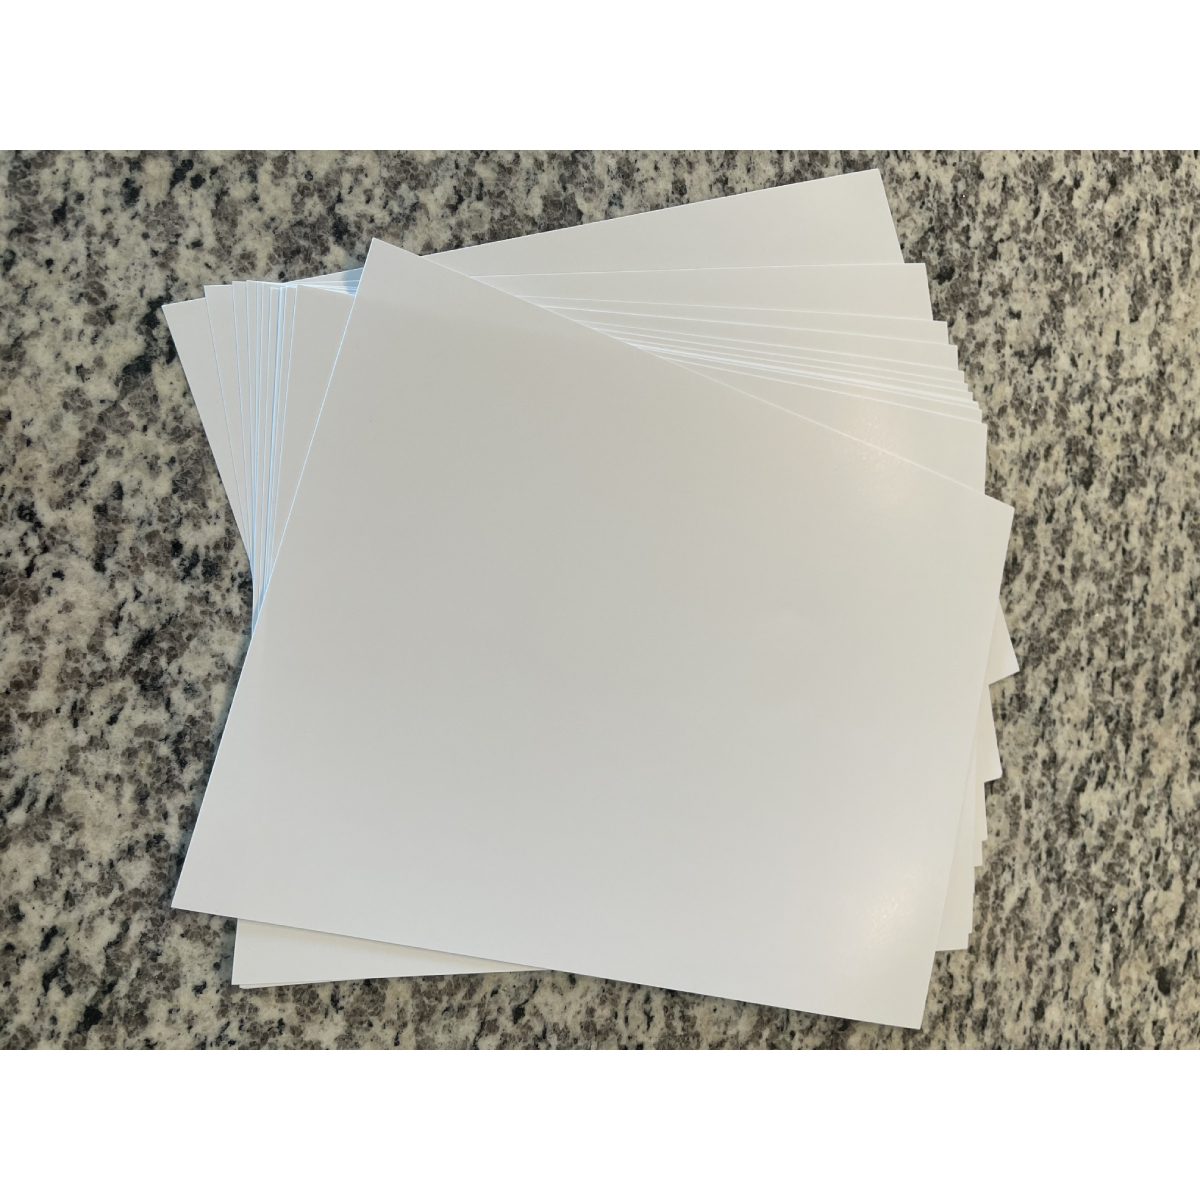 STICKER SHEETS - CARDSTOCK SALE While Supplies Last –